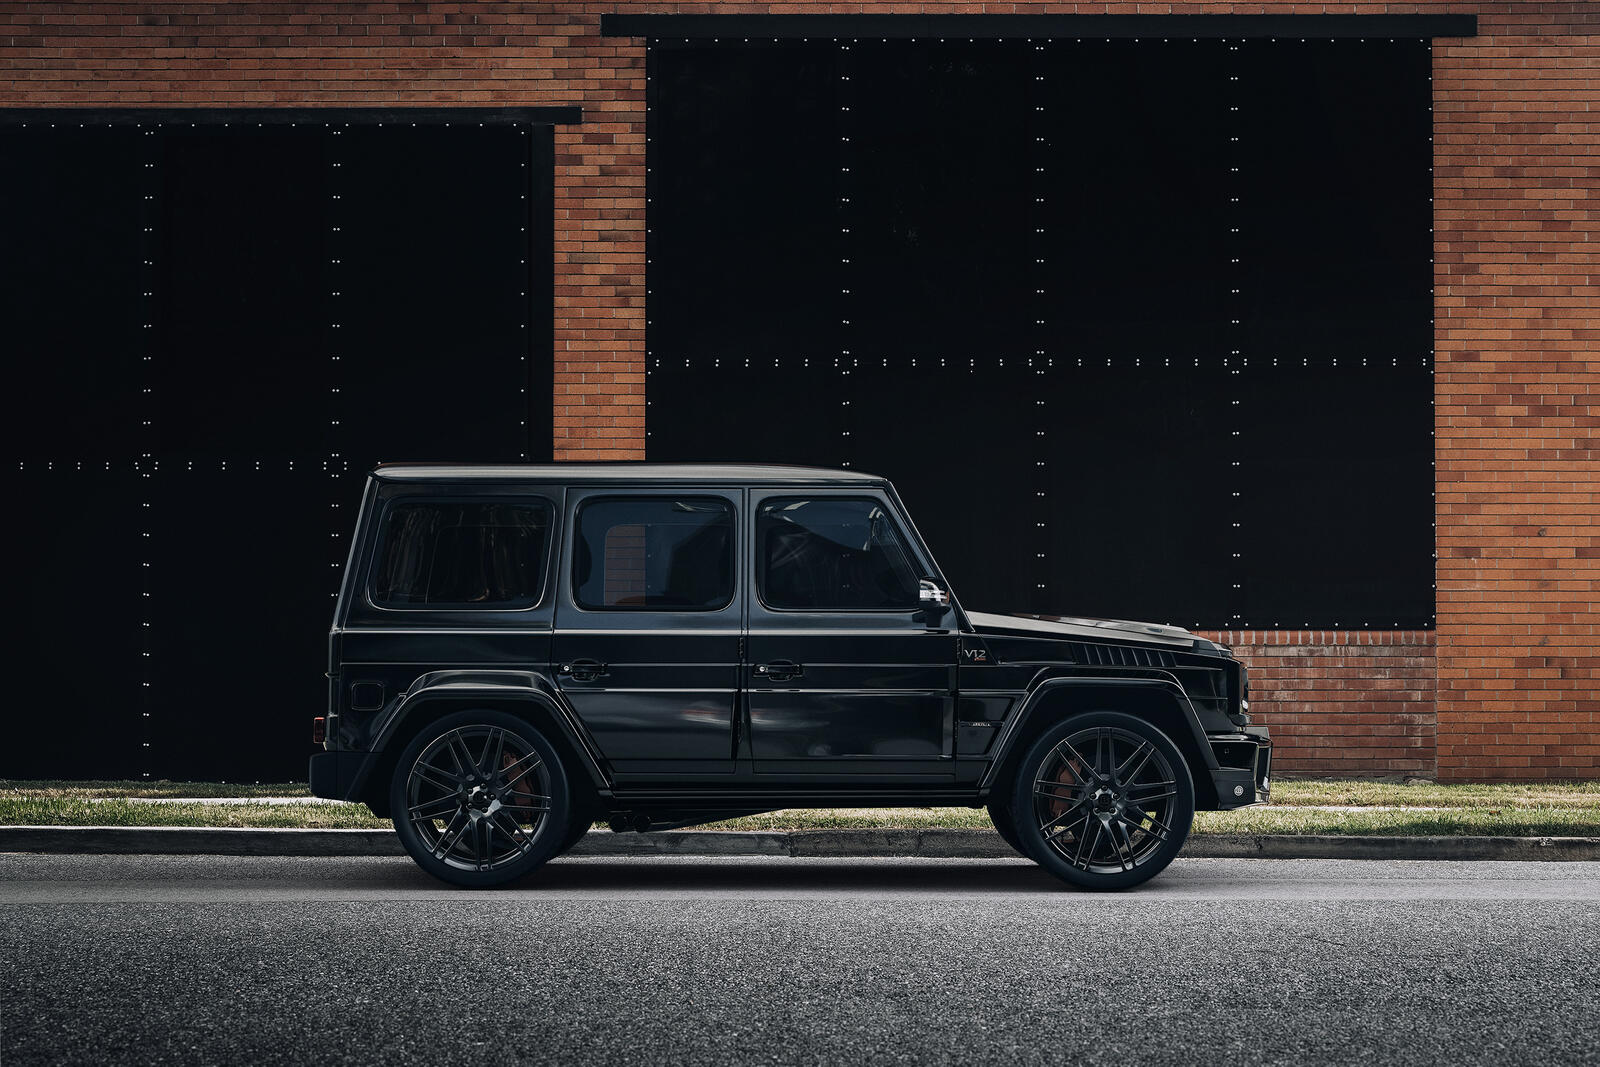 Wallpapers cars black jeep Mercedes G Class on the desktop